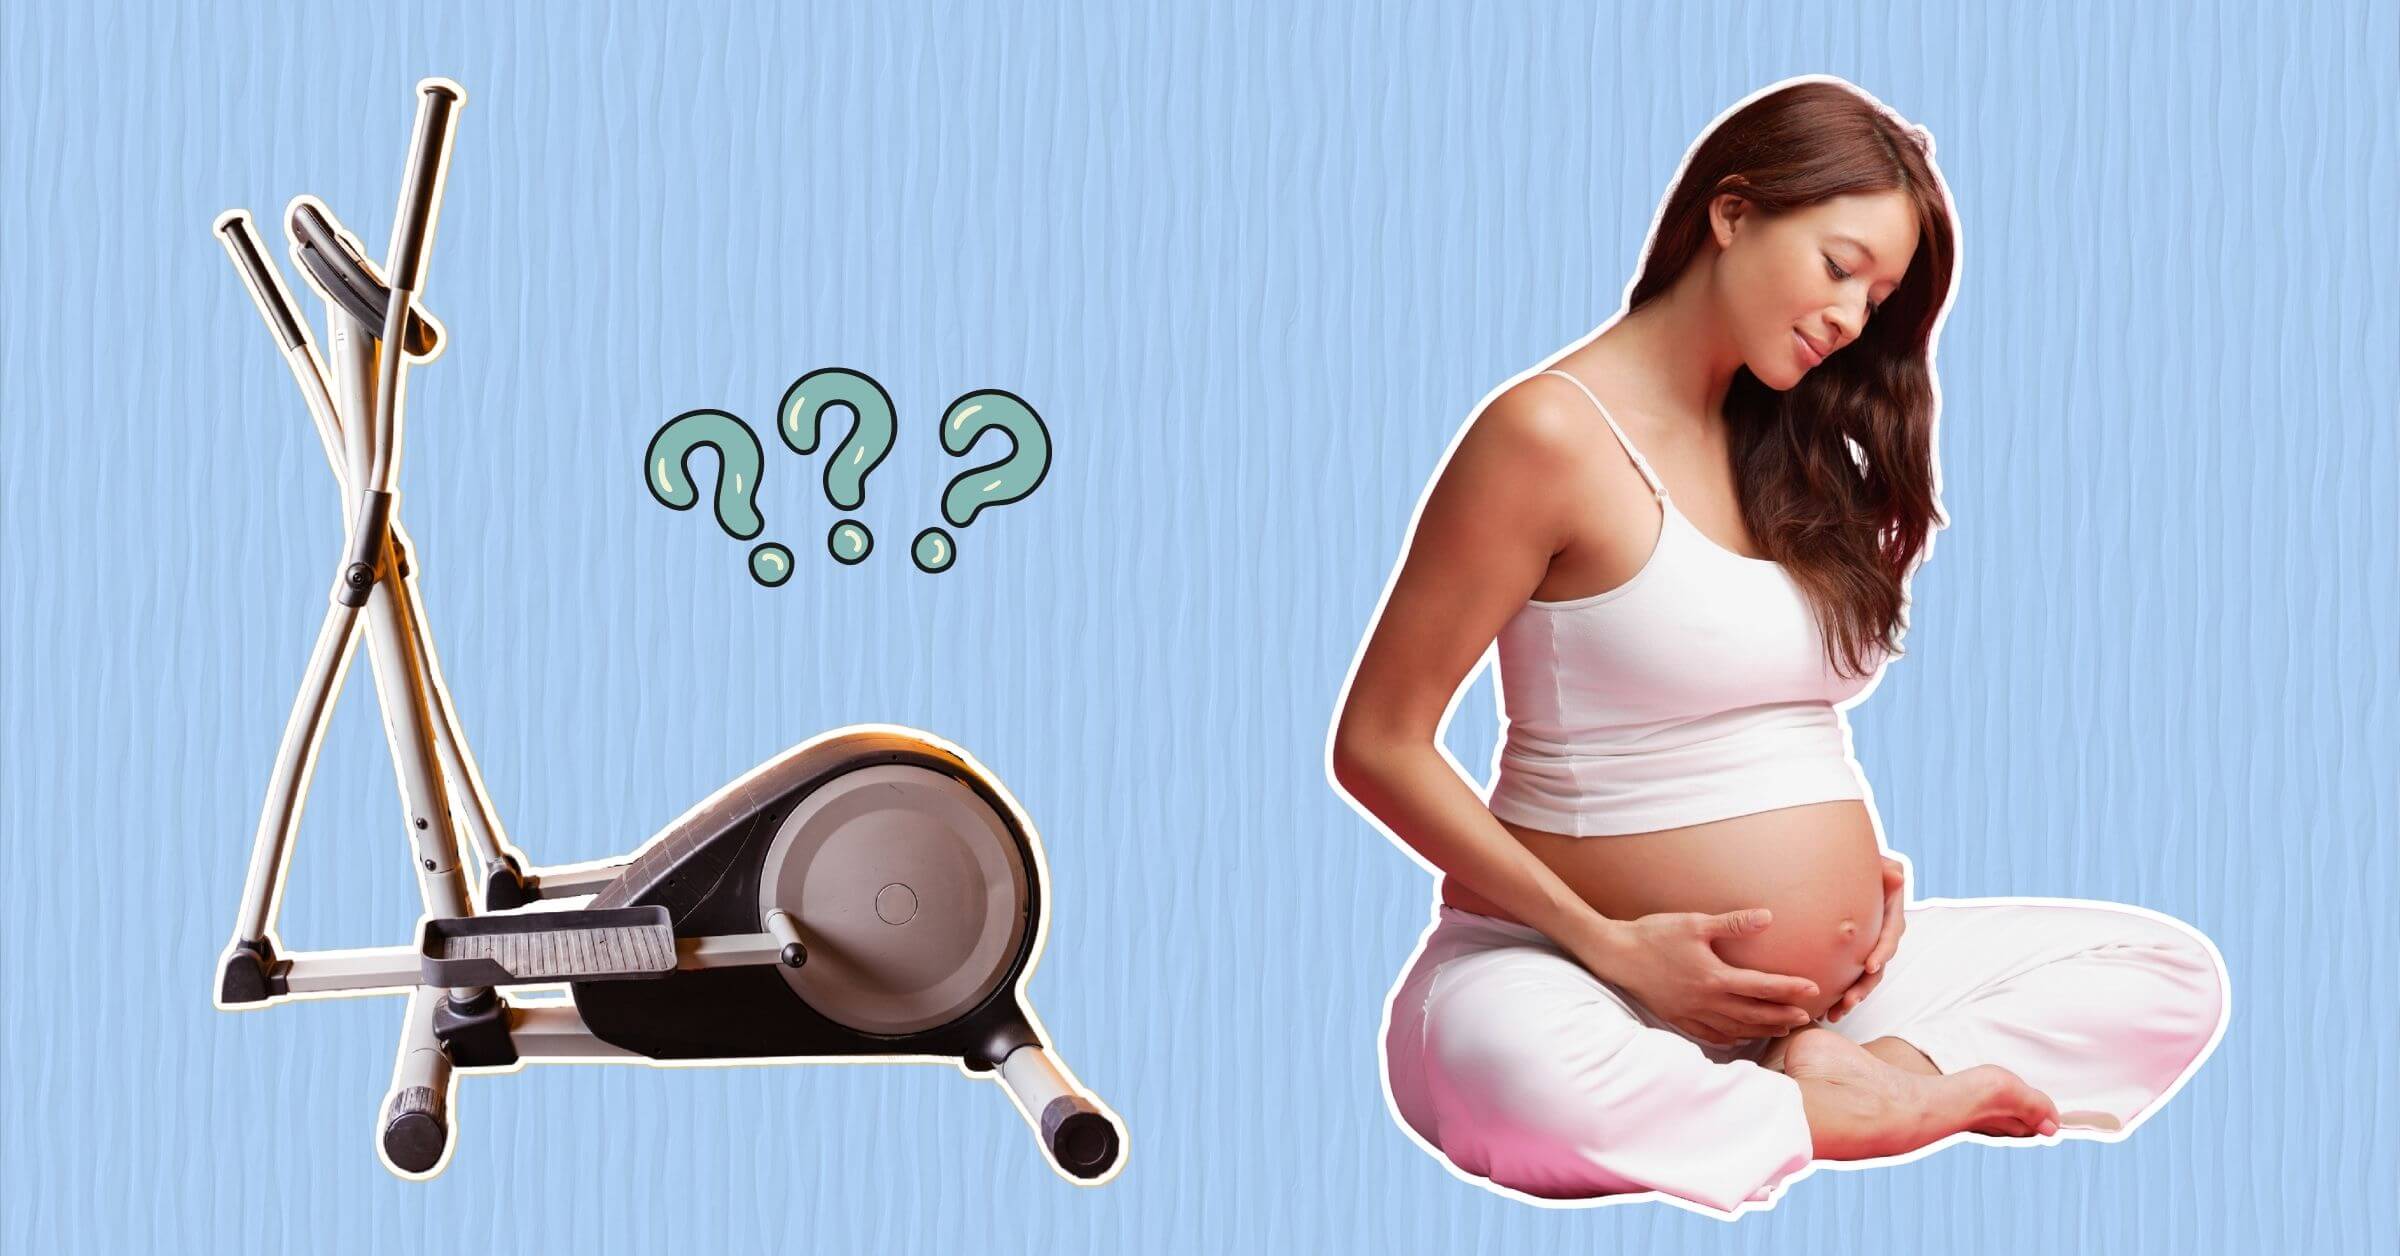 Can You Use Elliptical While Pregnant